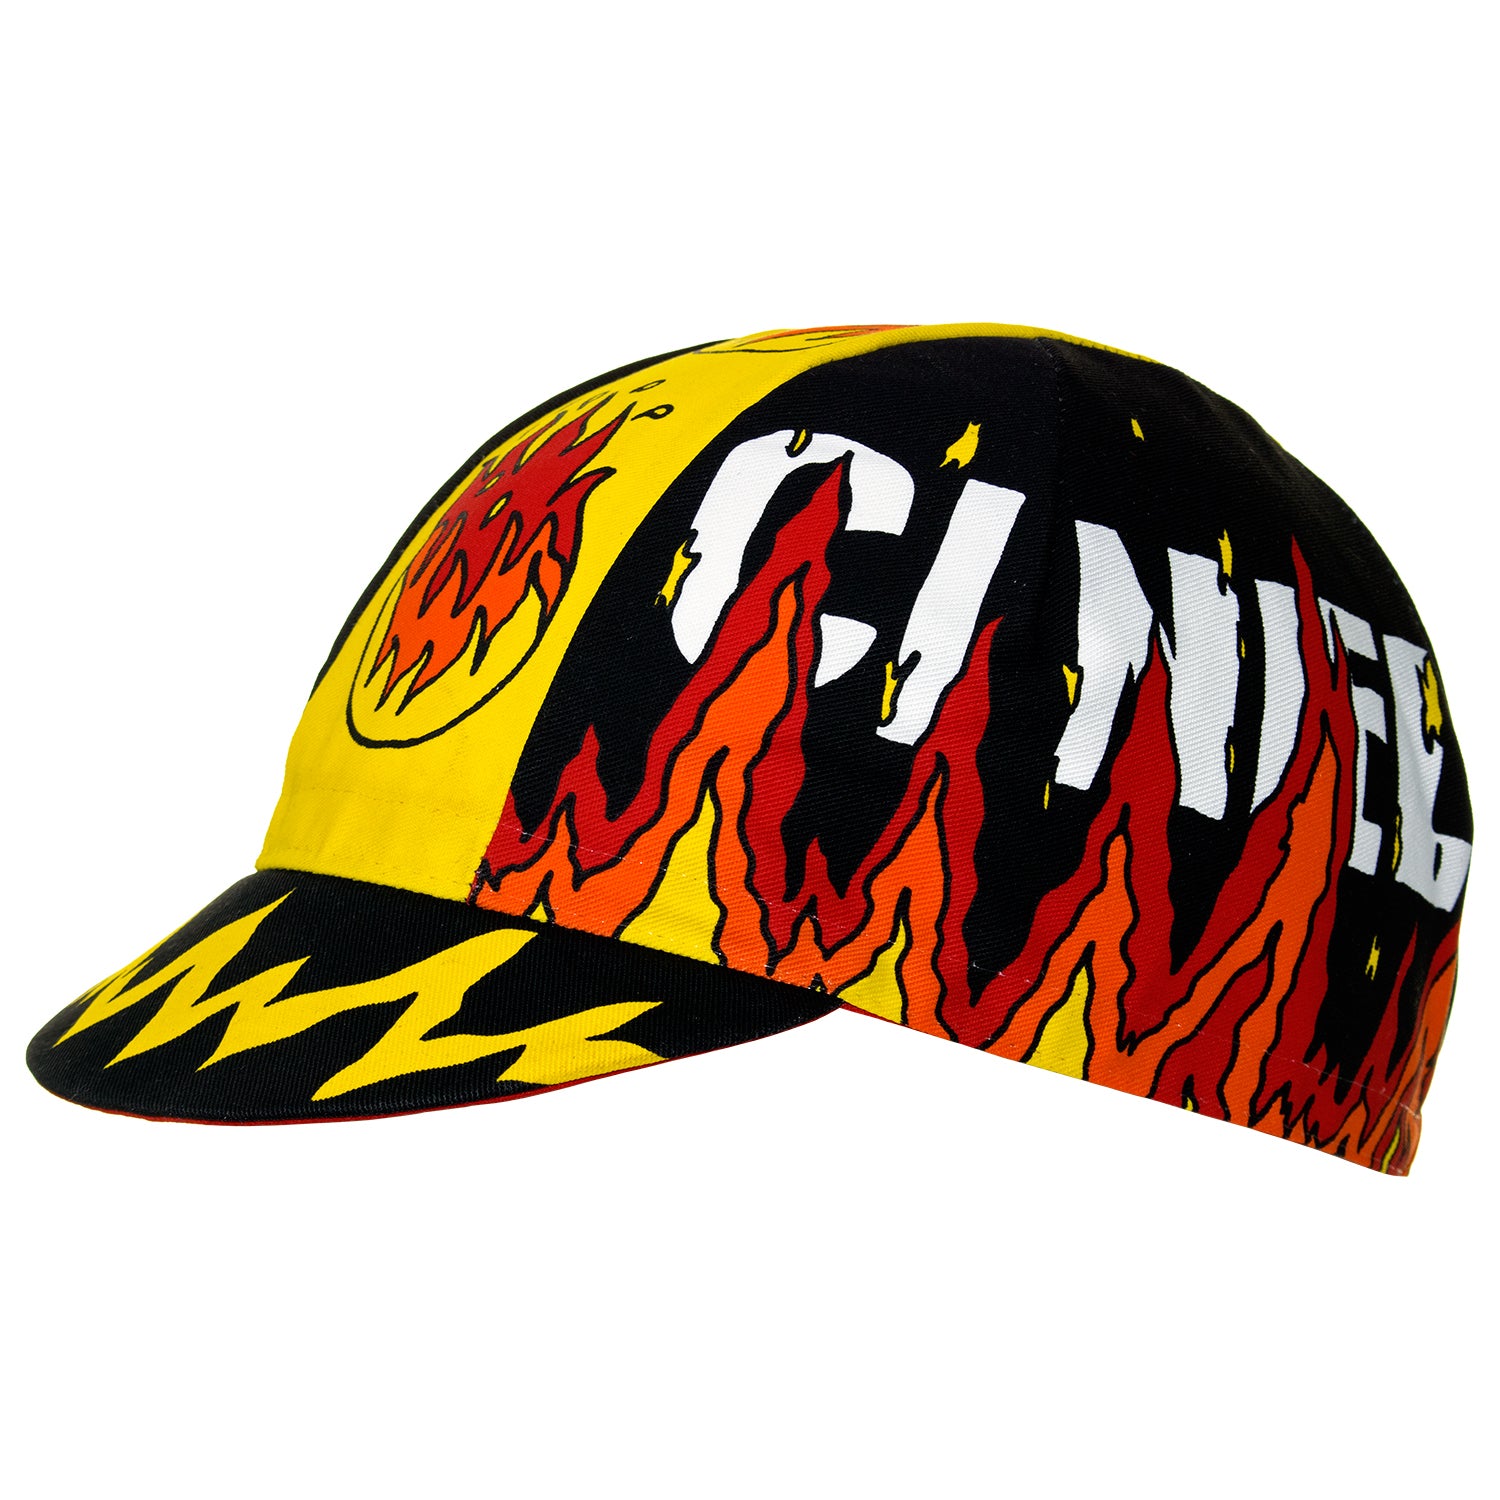 Side view of the Cinelli Ana Benaroya Fire Cotton Cycling Cap, showing the Stunning yellow, orange, red and black design.